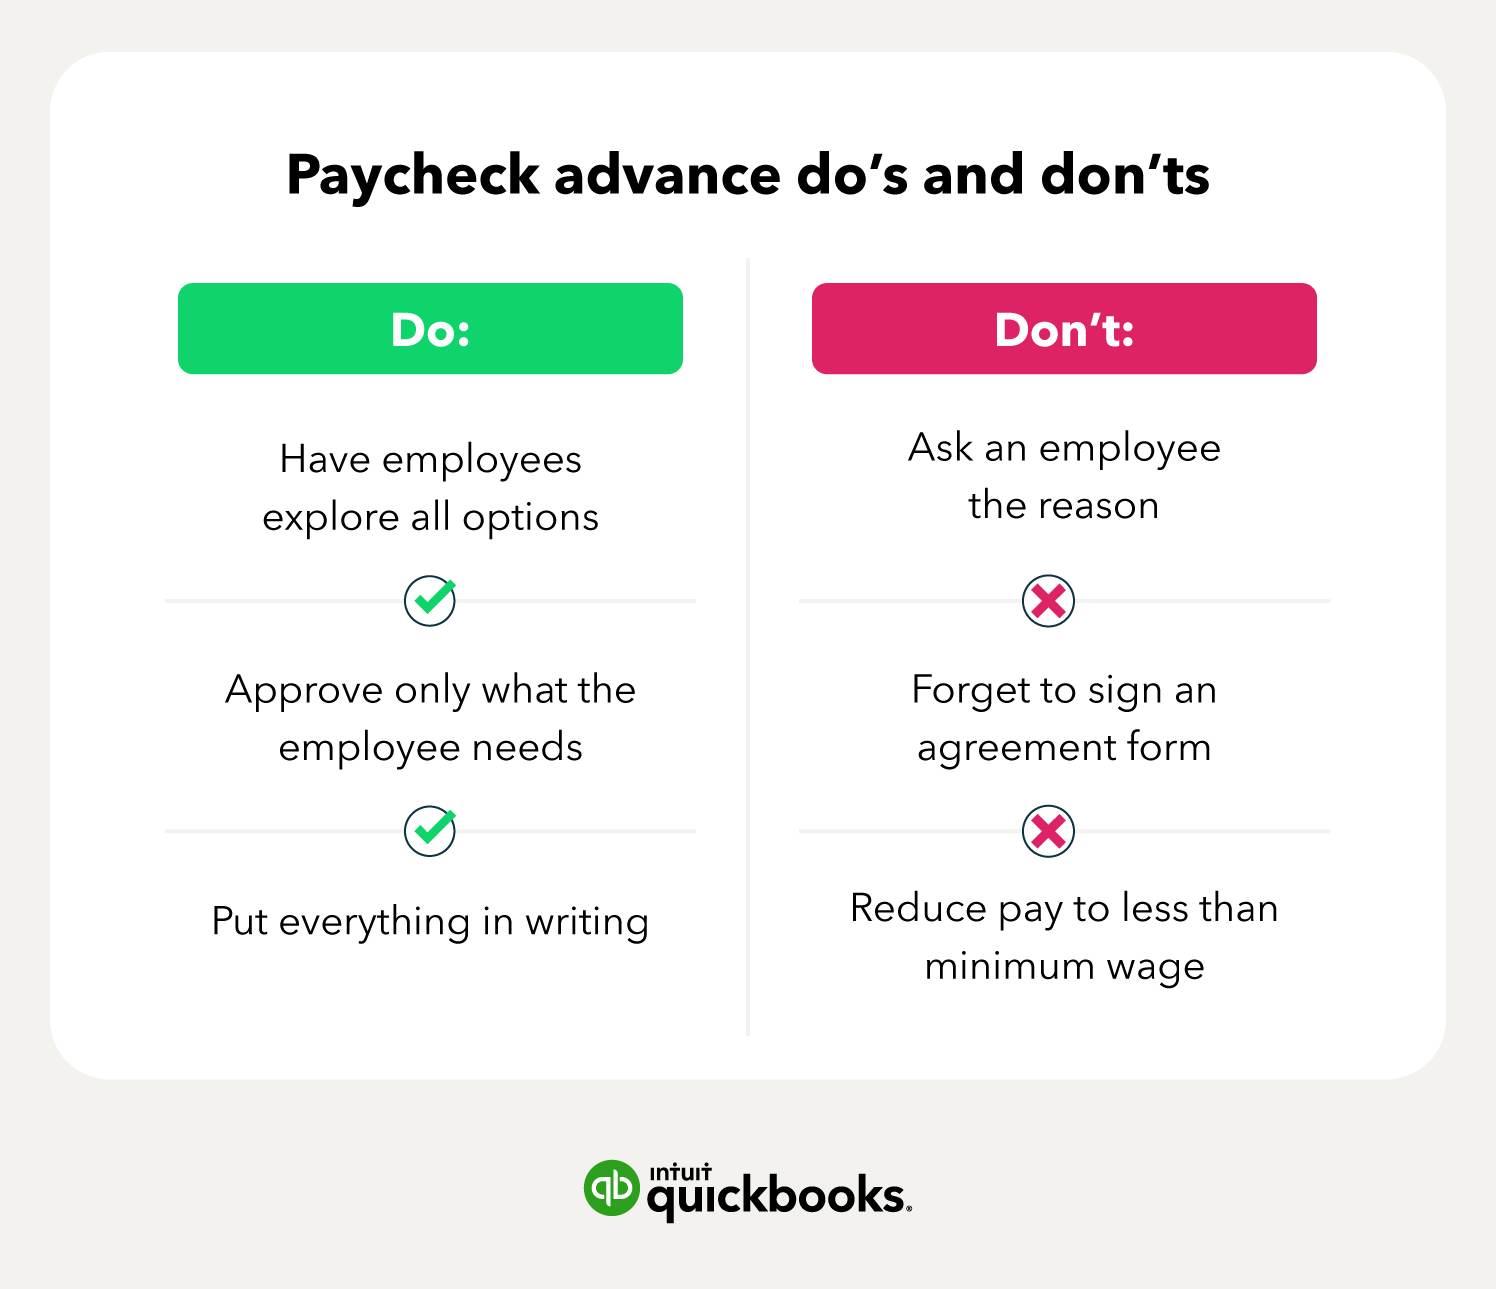 Paycheck advance do's and don'ts